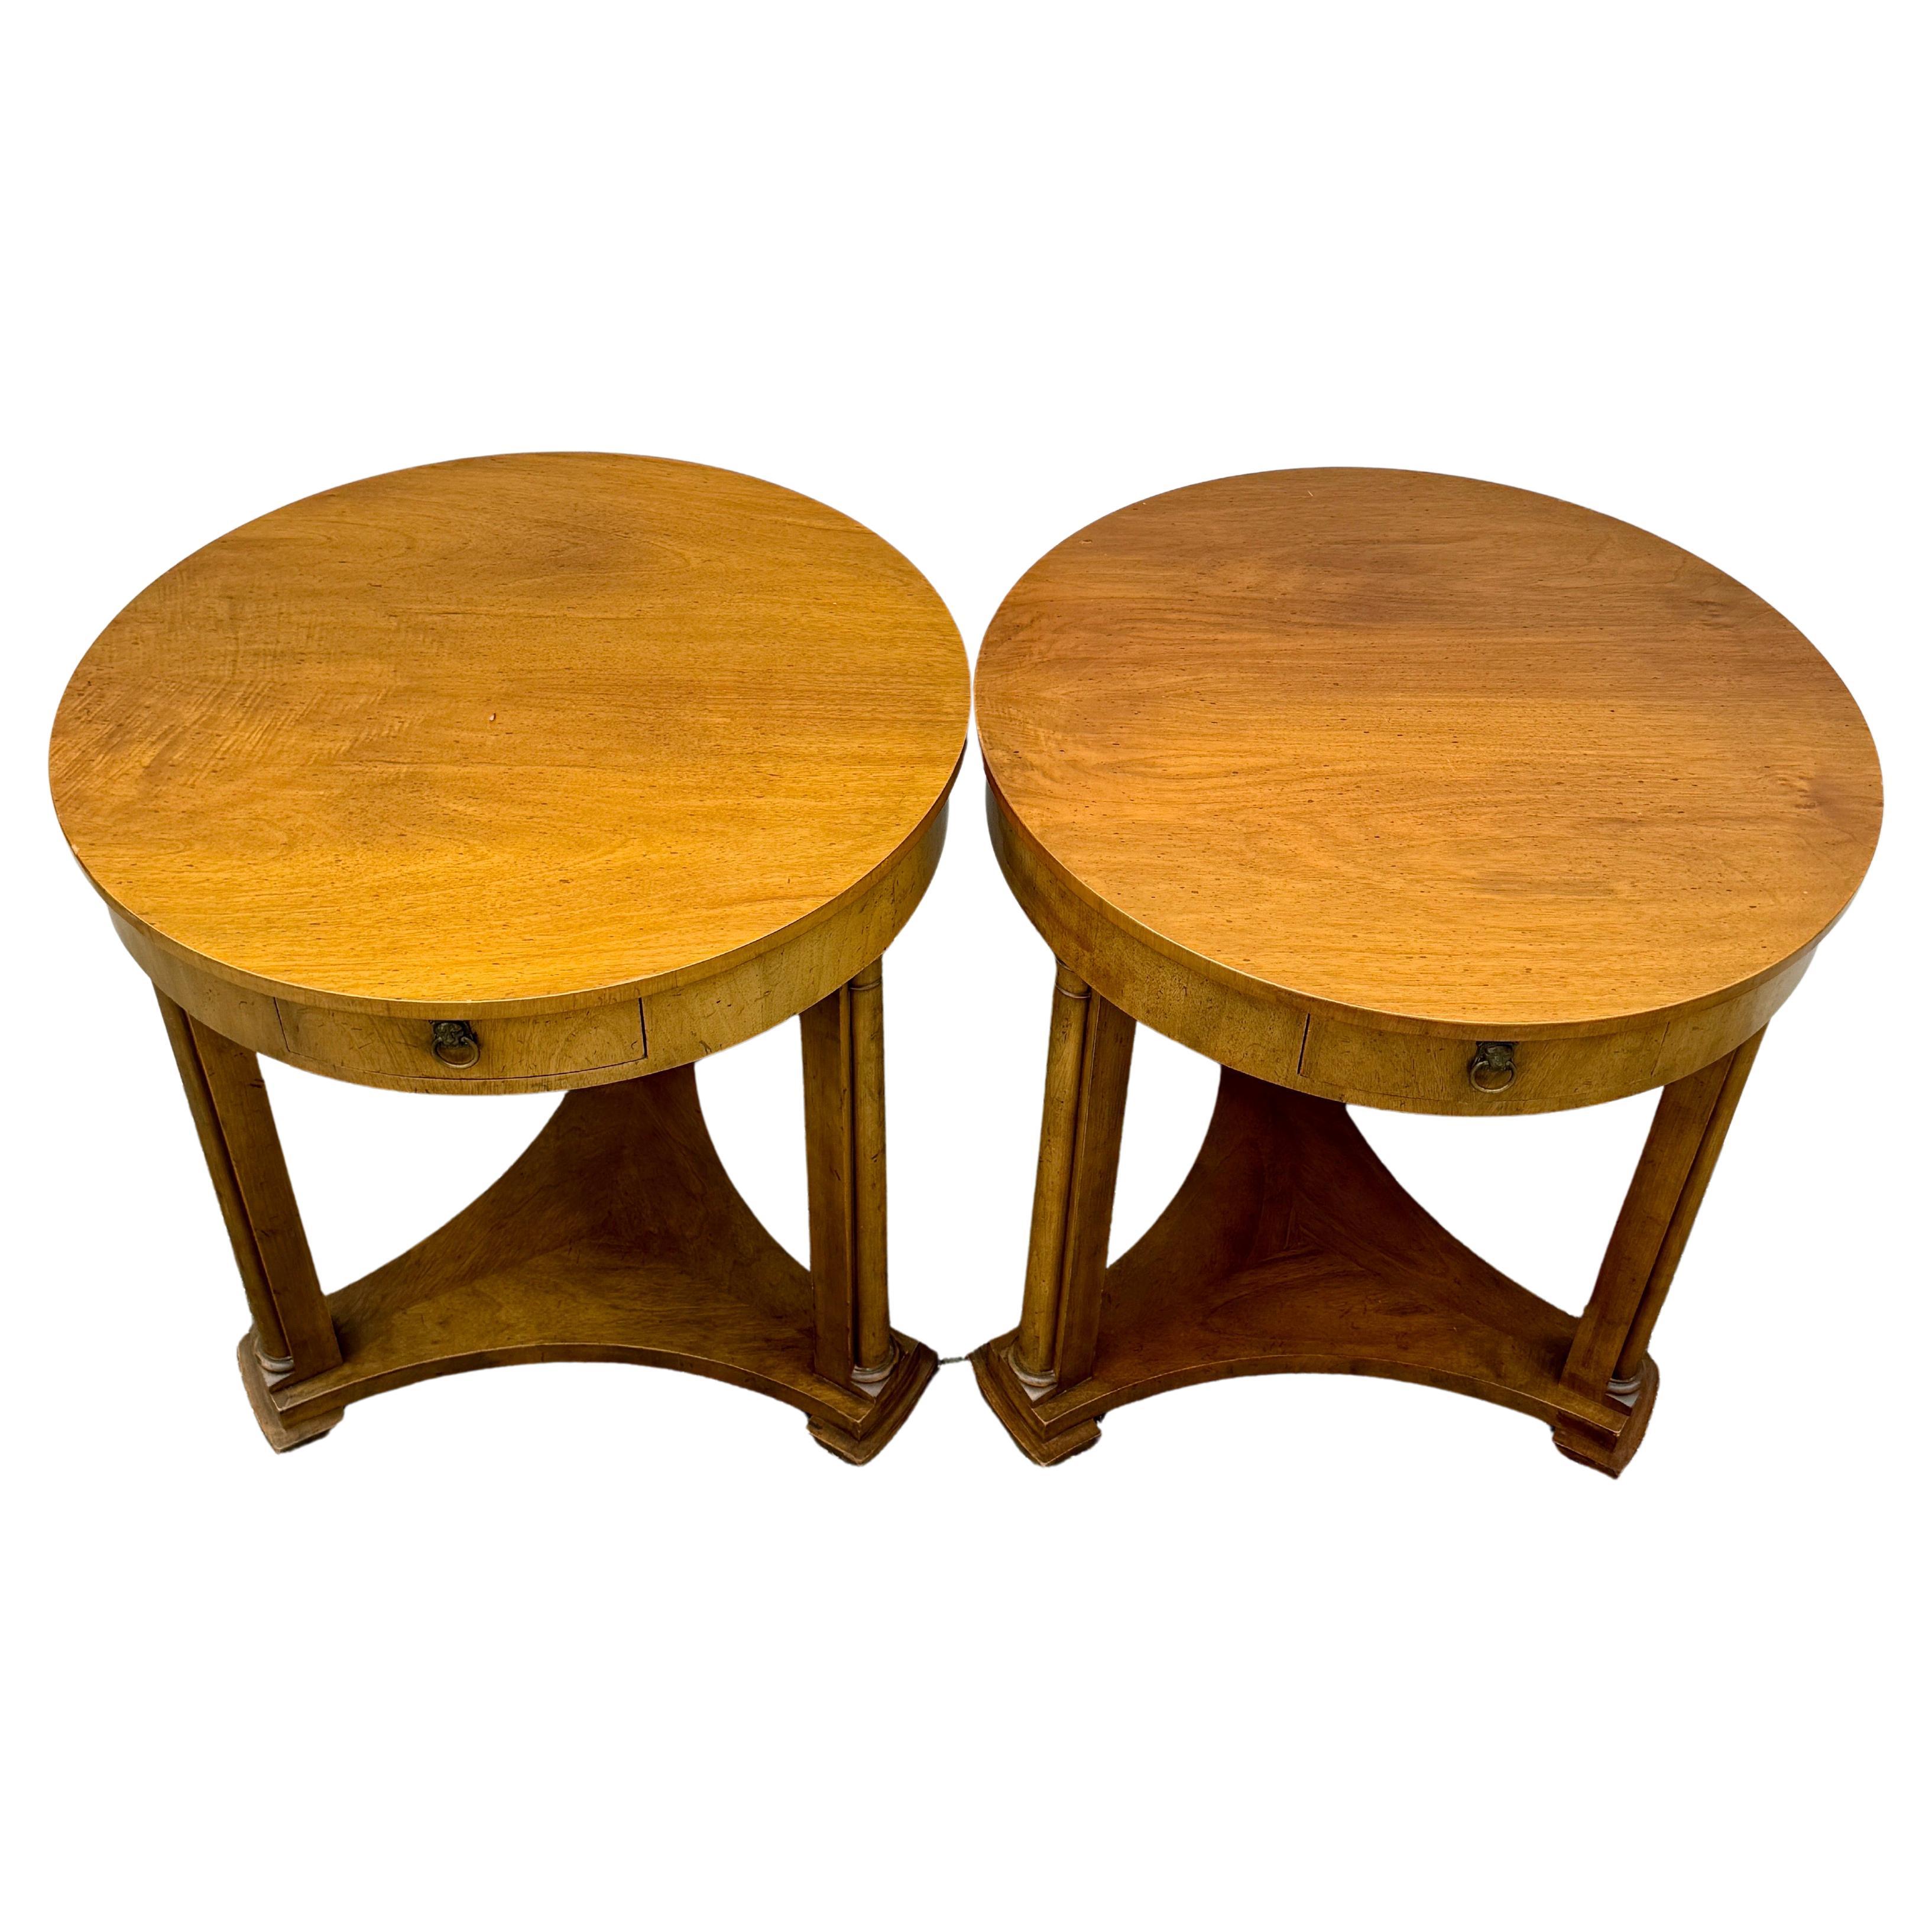 Baker Furniture Round End Side Center Hall Tables, A Pair

Vintage classic pair of wood tables from Baker Furniture that are very versatile for today’s interiors. These tables each have one drawer, with lion drawer pulls as well as three column